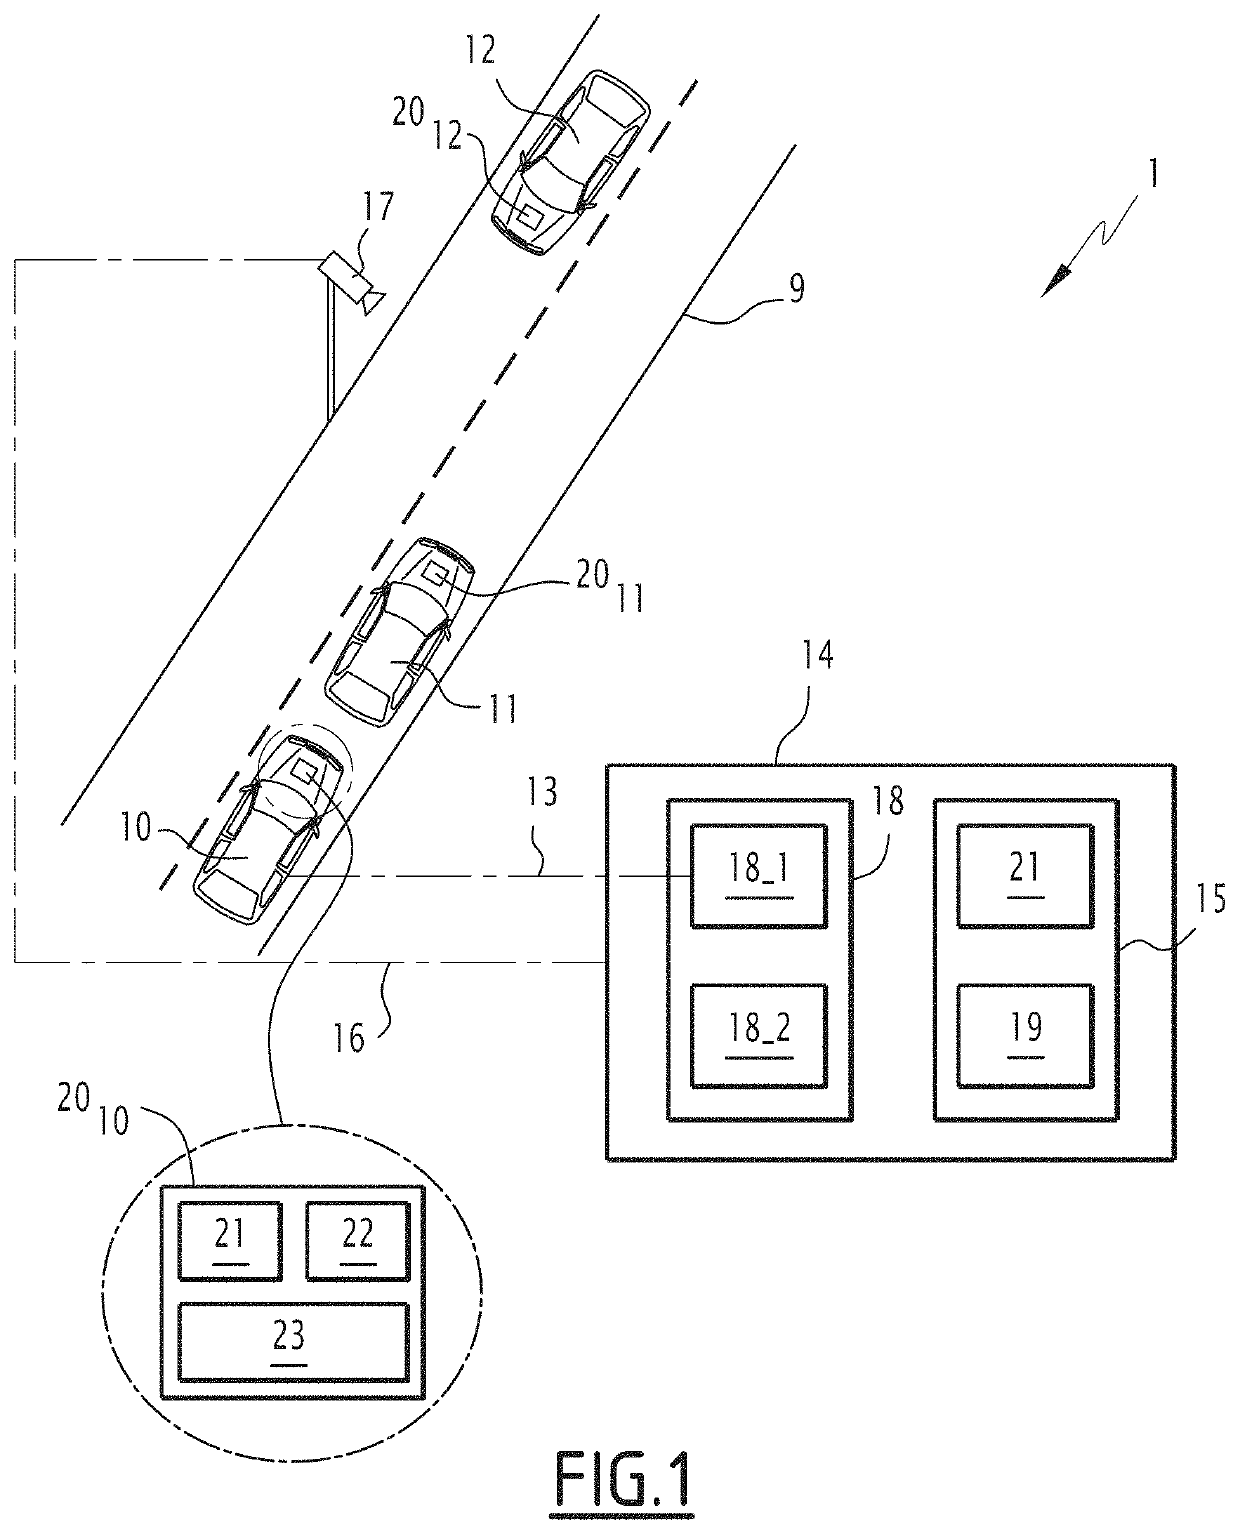 Method of assisting with the driving of vehicles, computer program and associated system